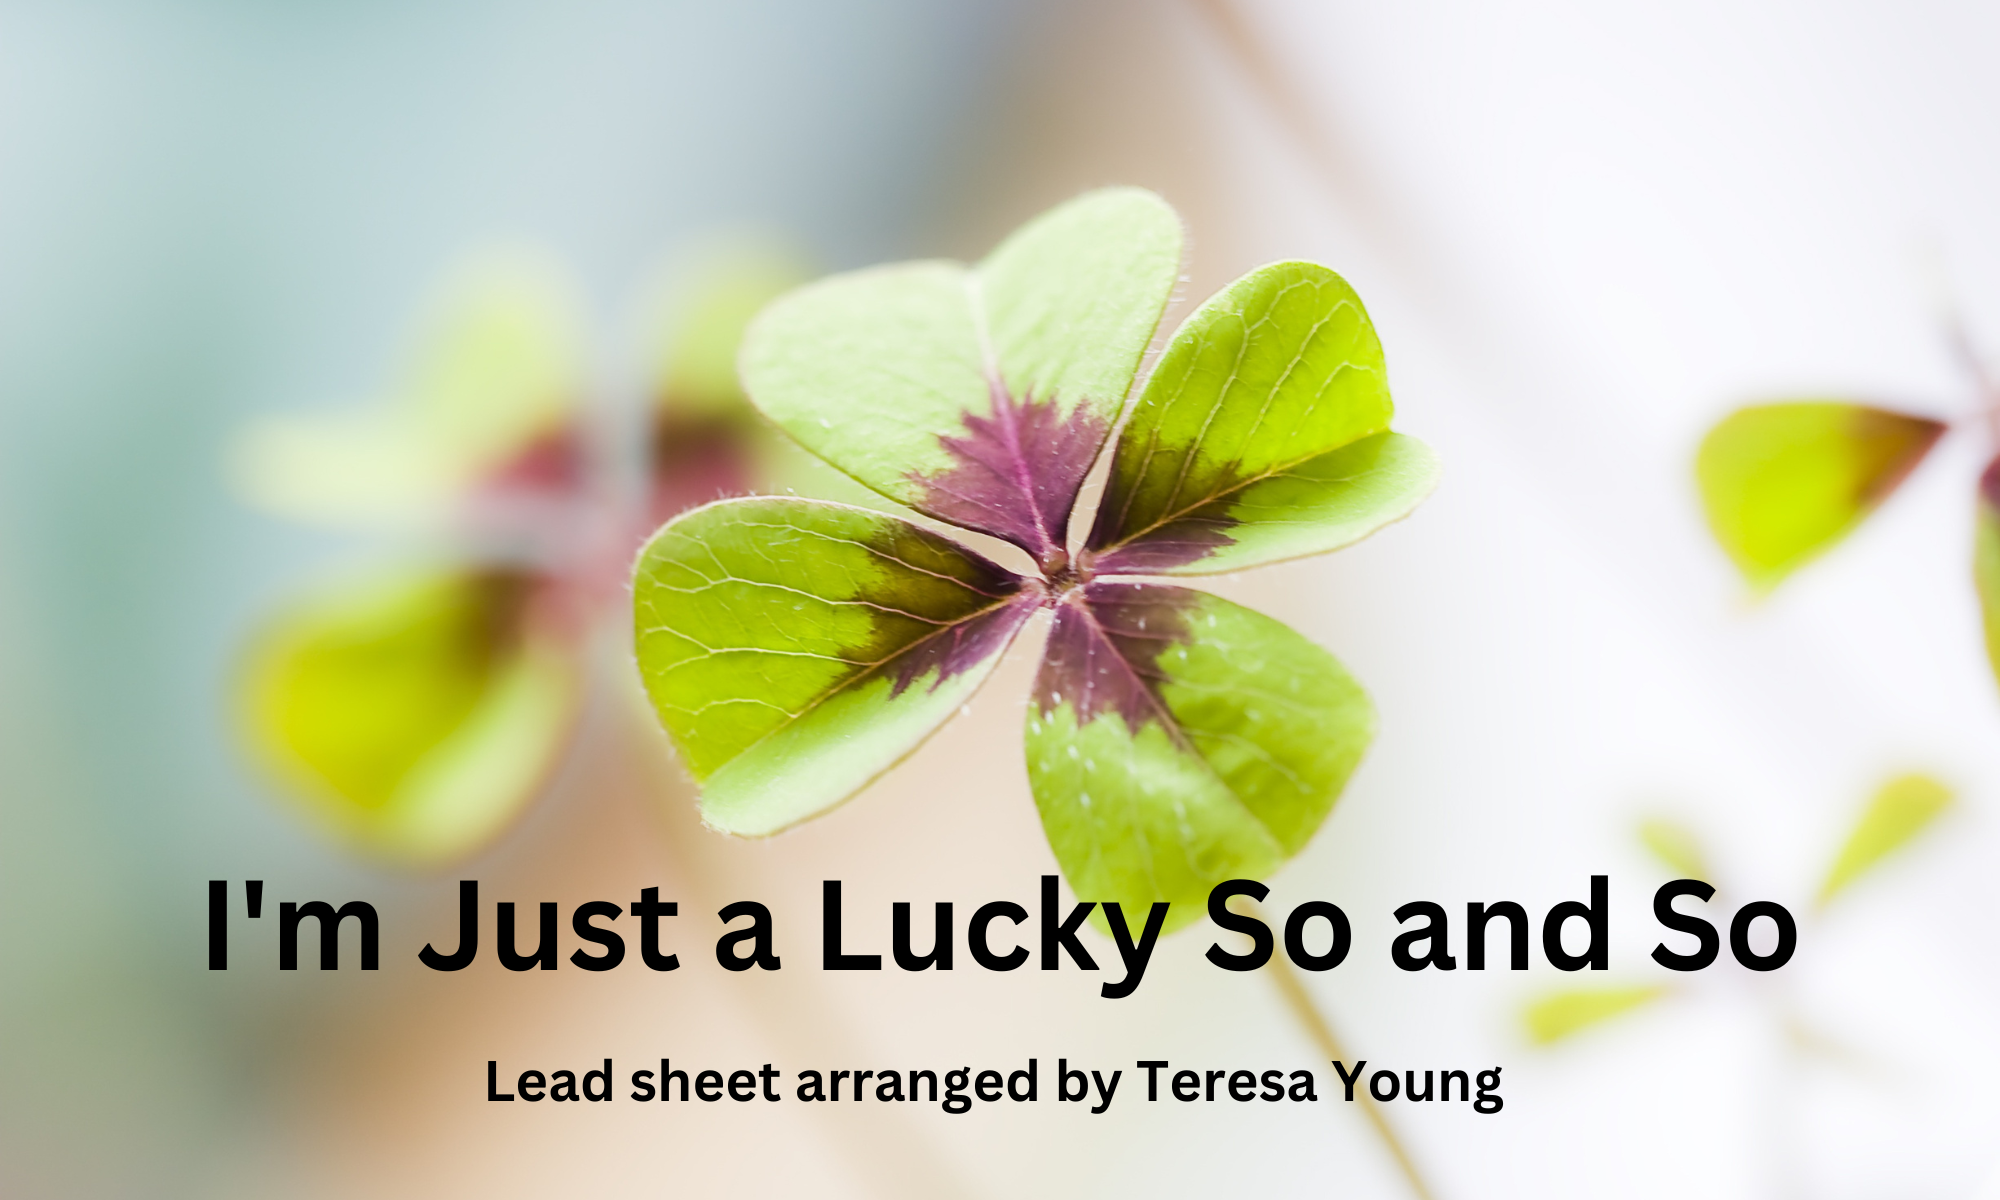 I'm Just a Lucky So and So, lead sheet arranged by Teresa Young